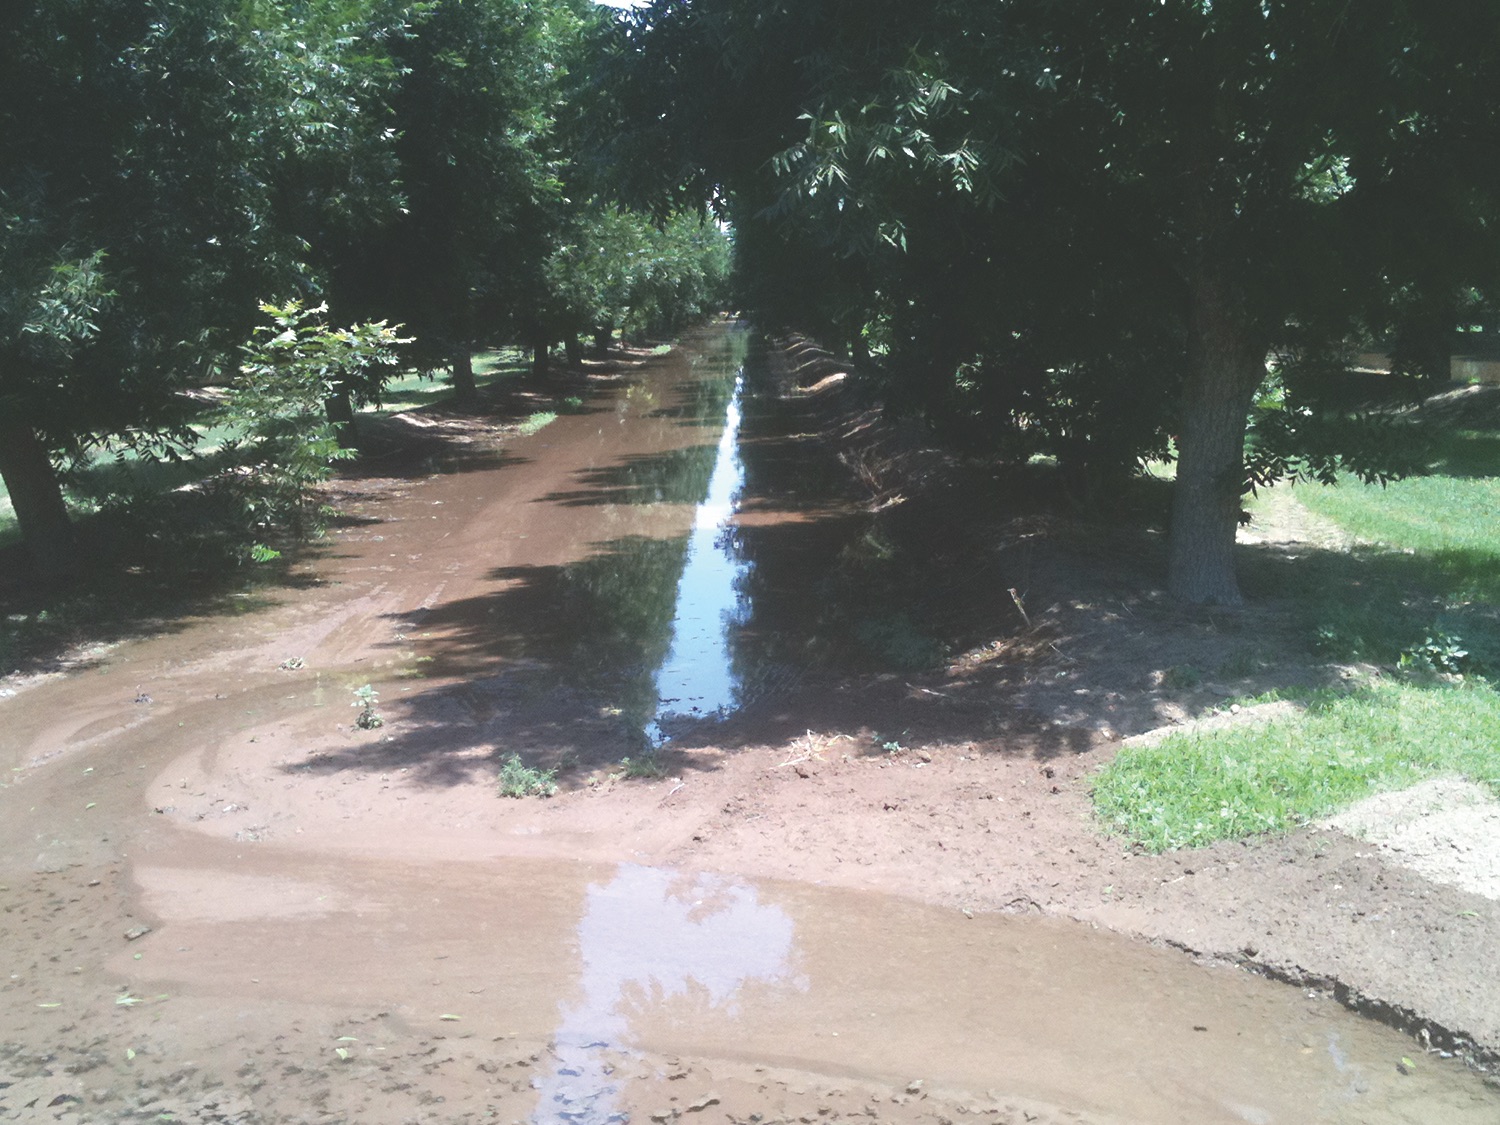 Irrigation water runs between two rows of pecan trees. Trees water demand increases as the season advances.